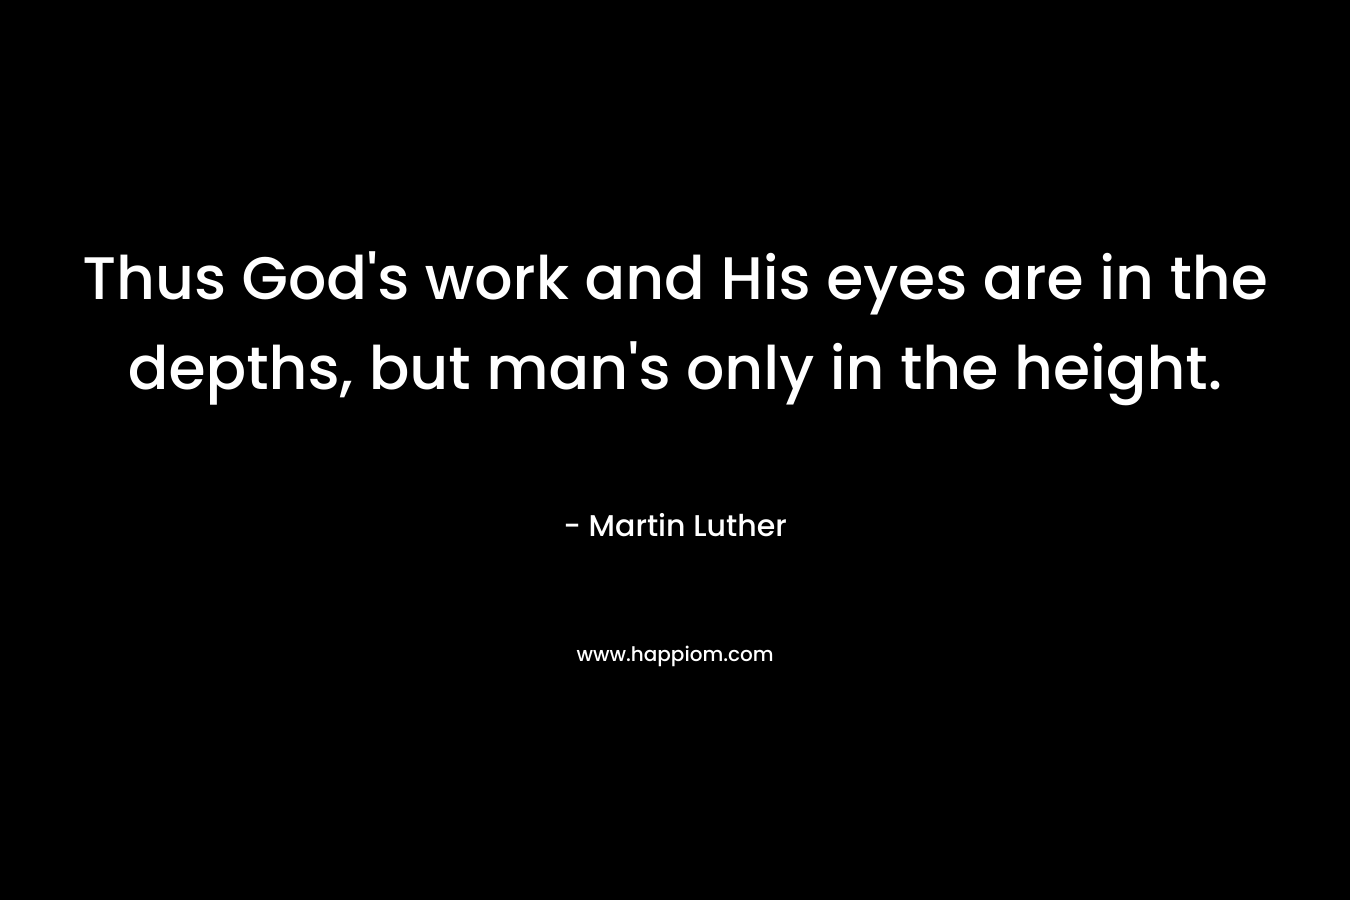 Thus God's work and His eyes are in the depths, but man's only in the height.